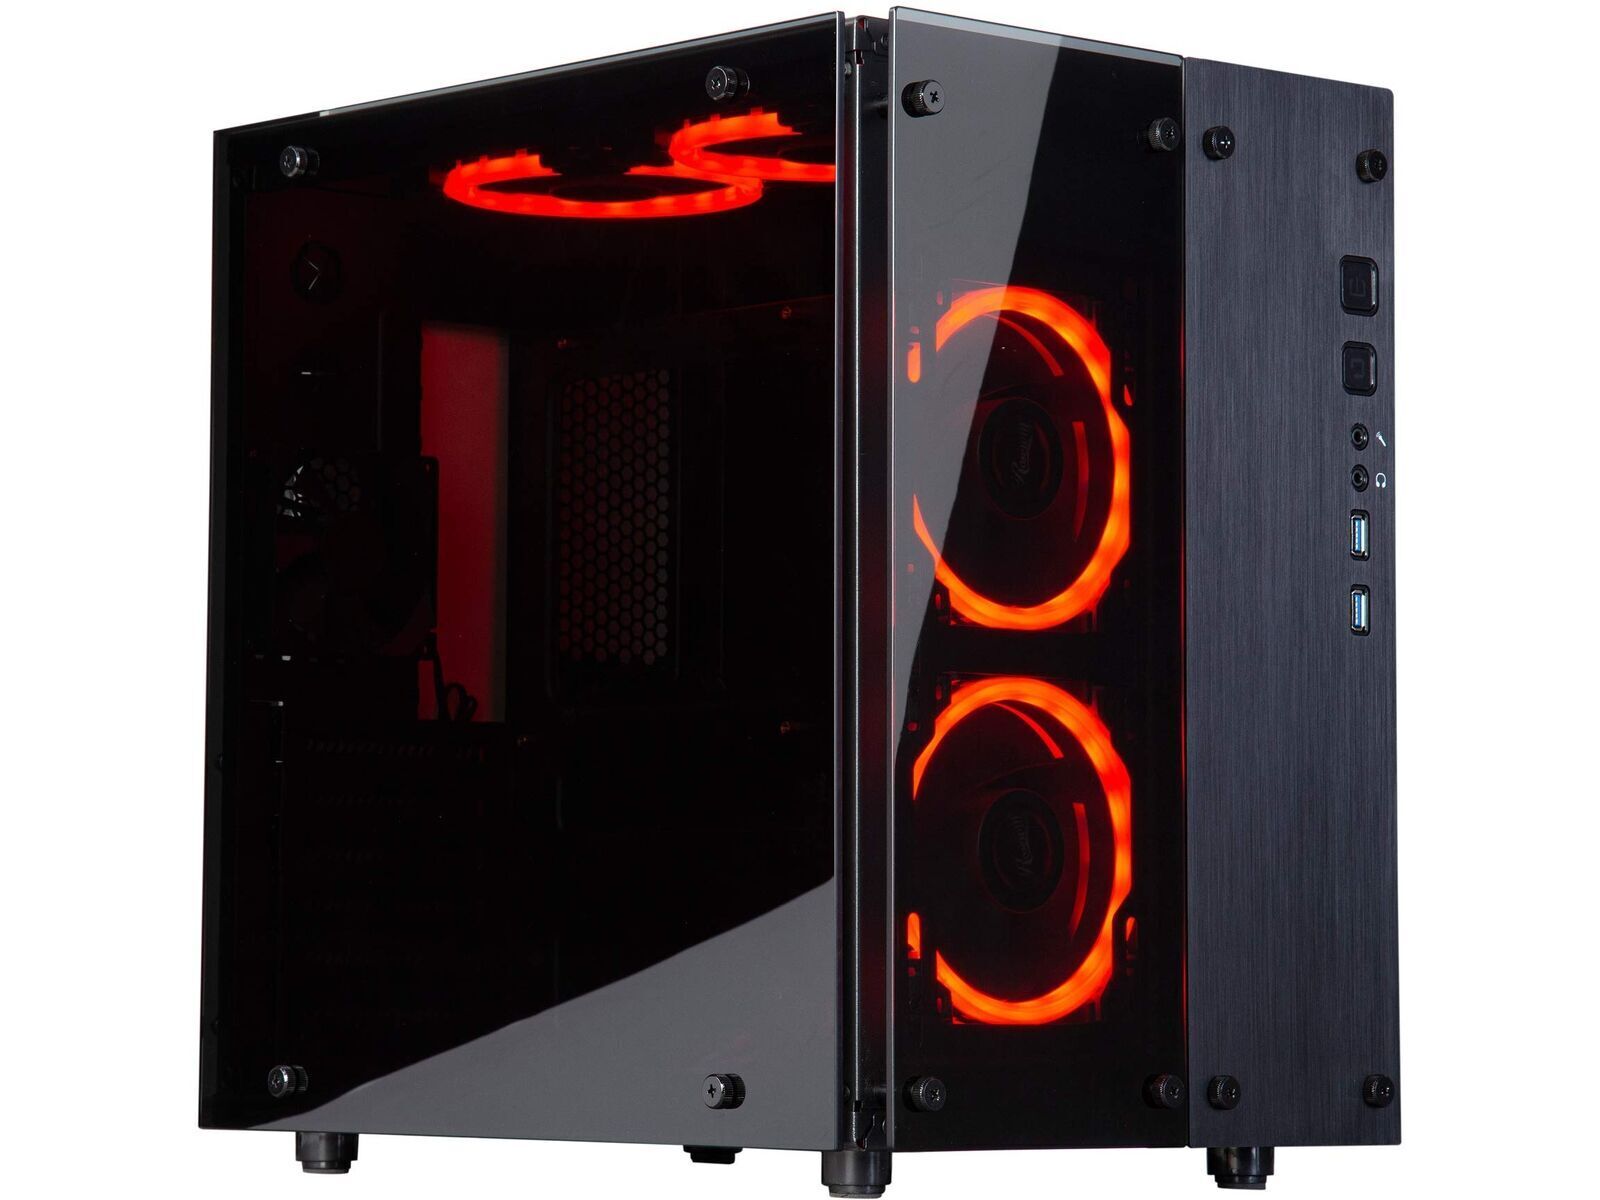 Rosewill Cullinan PX RGB-ST Mid-Tower Case - Black